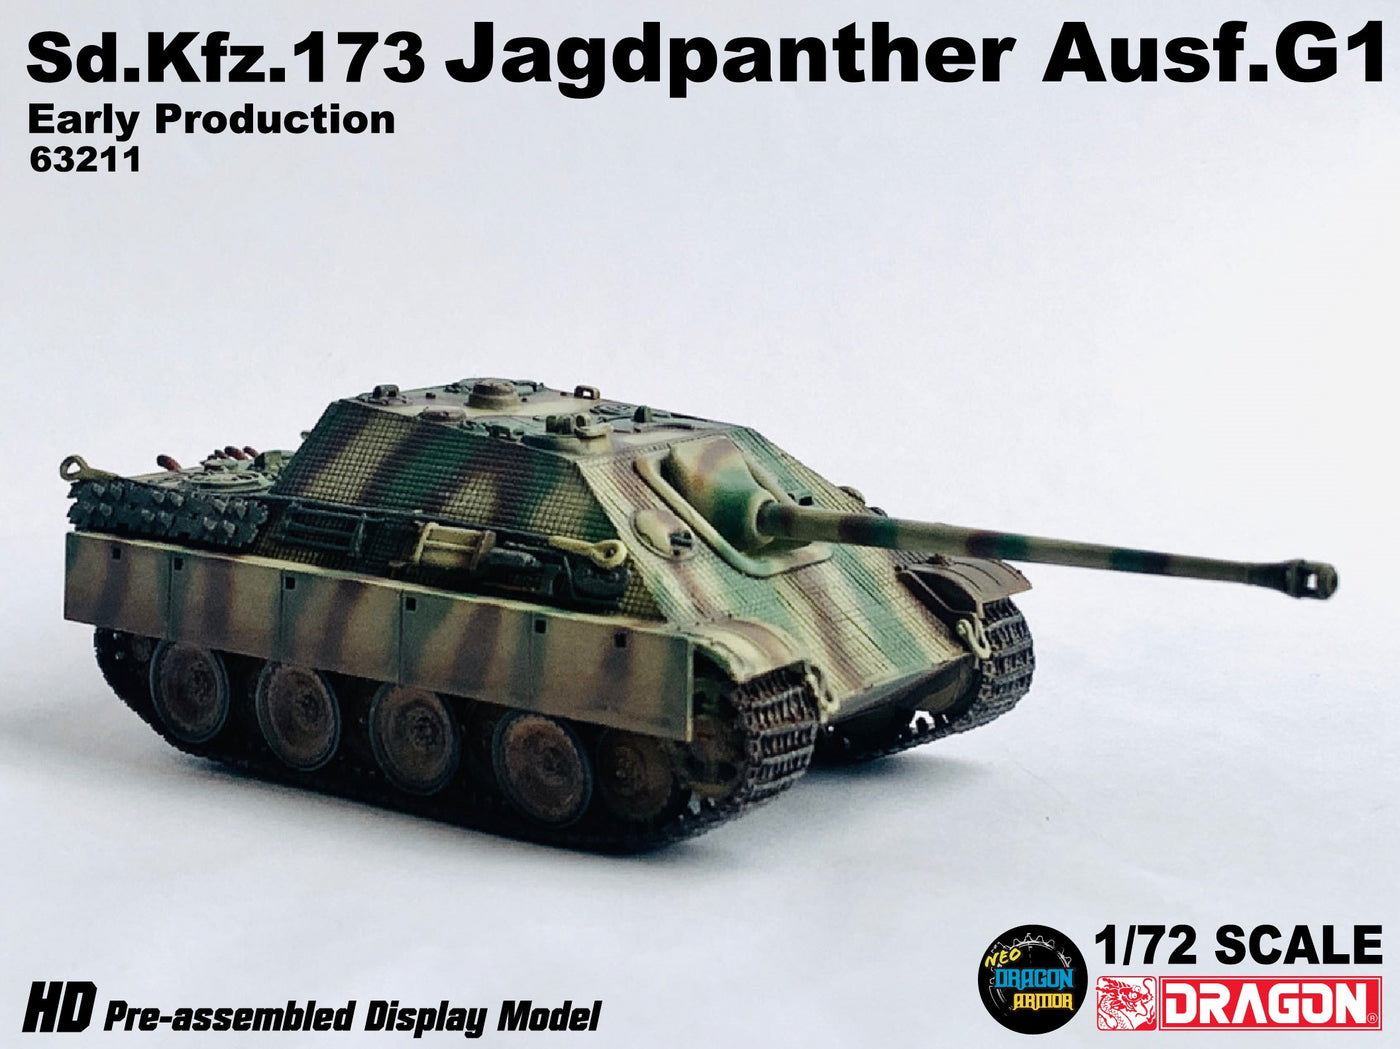 63211 - 1/72 Sd.Kfz.173 Jagdpanther Ausf.G1 Early Production – Cyber Hobby